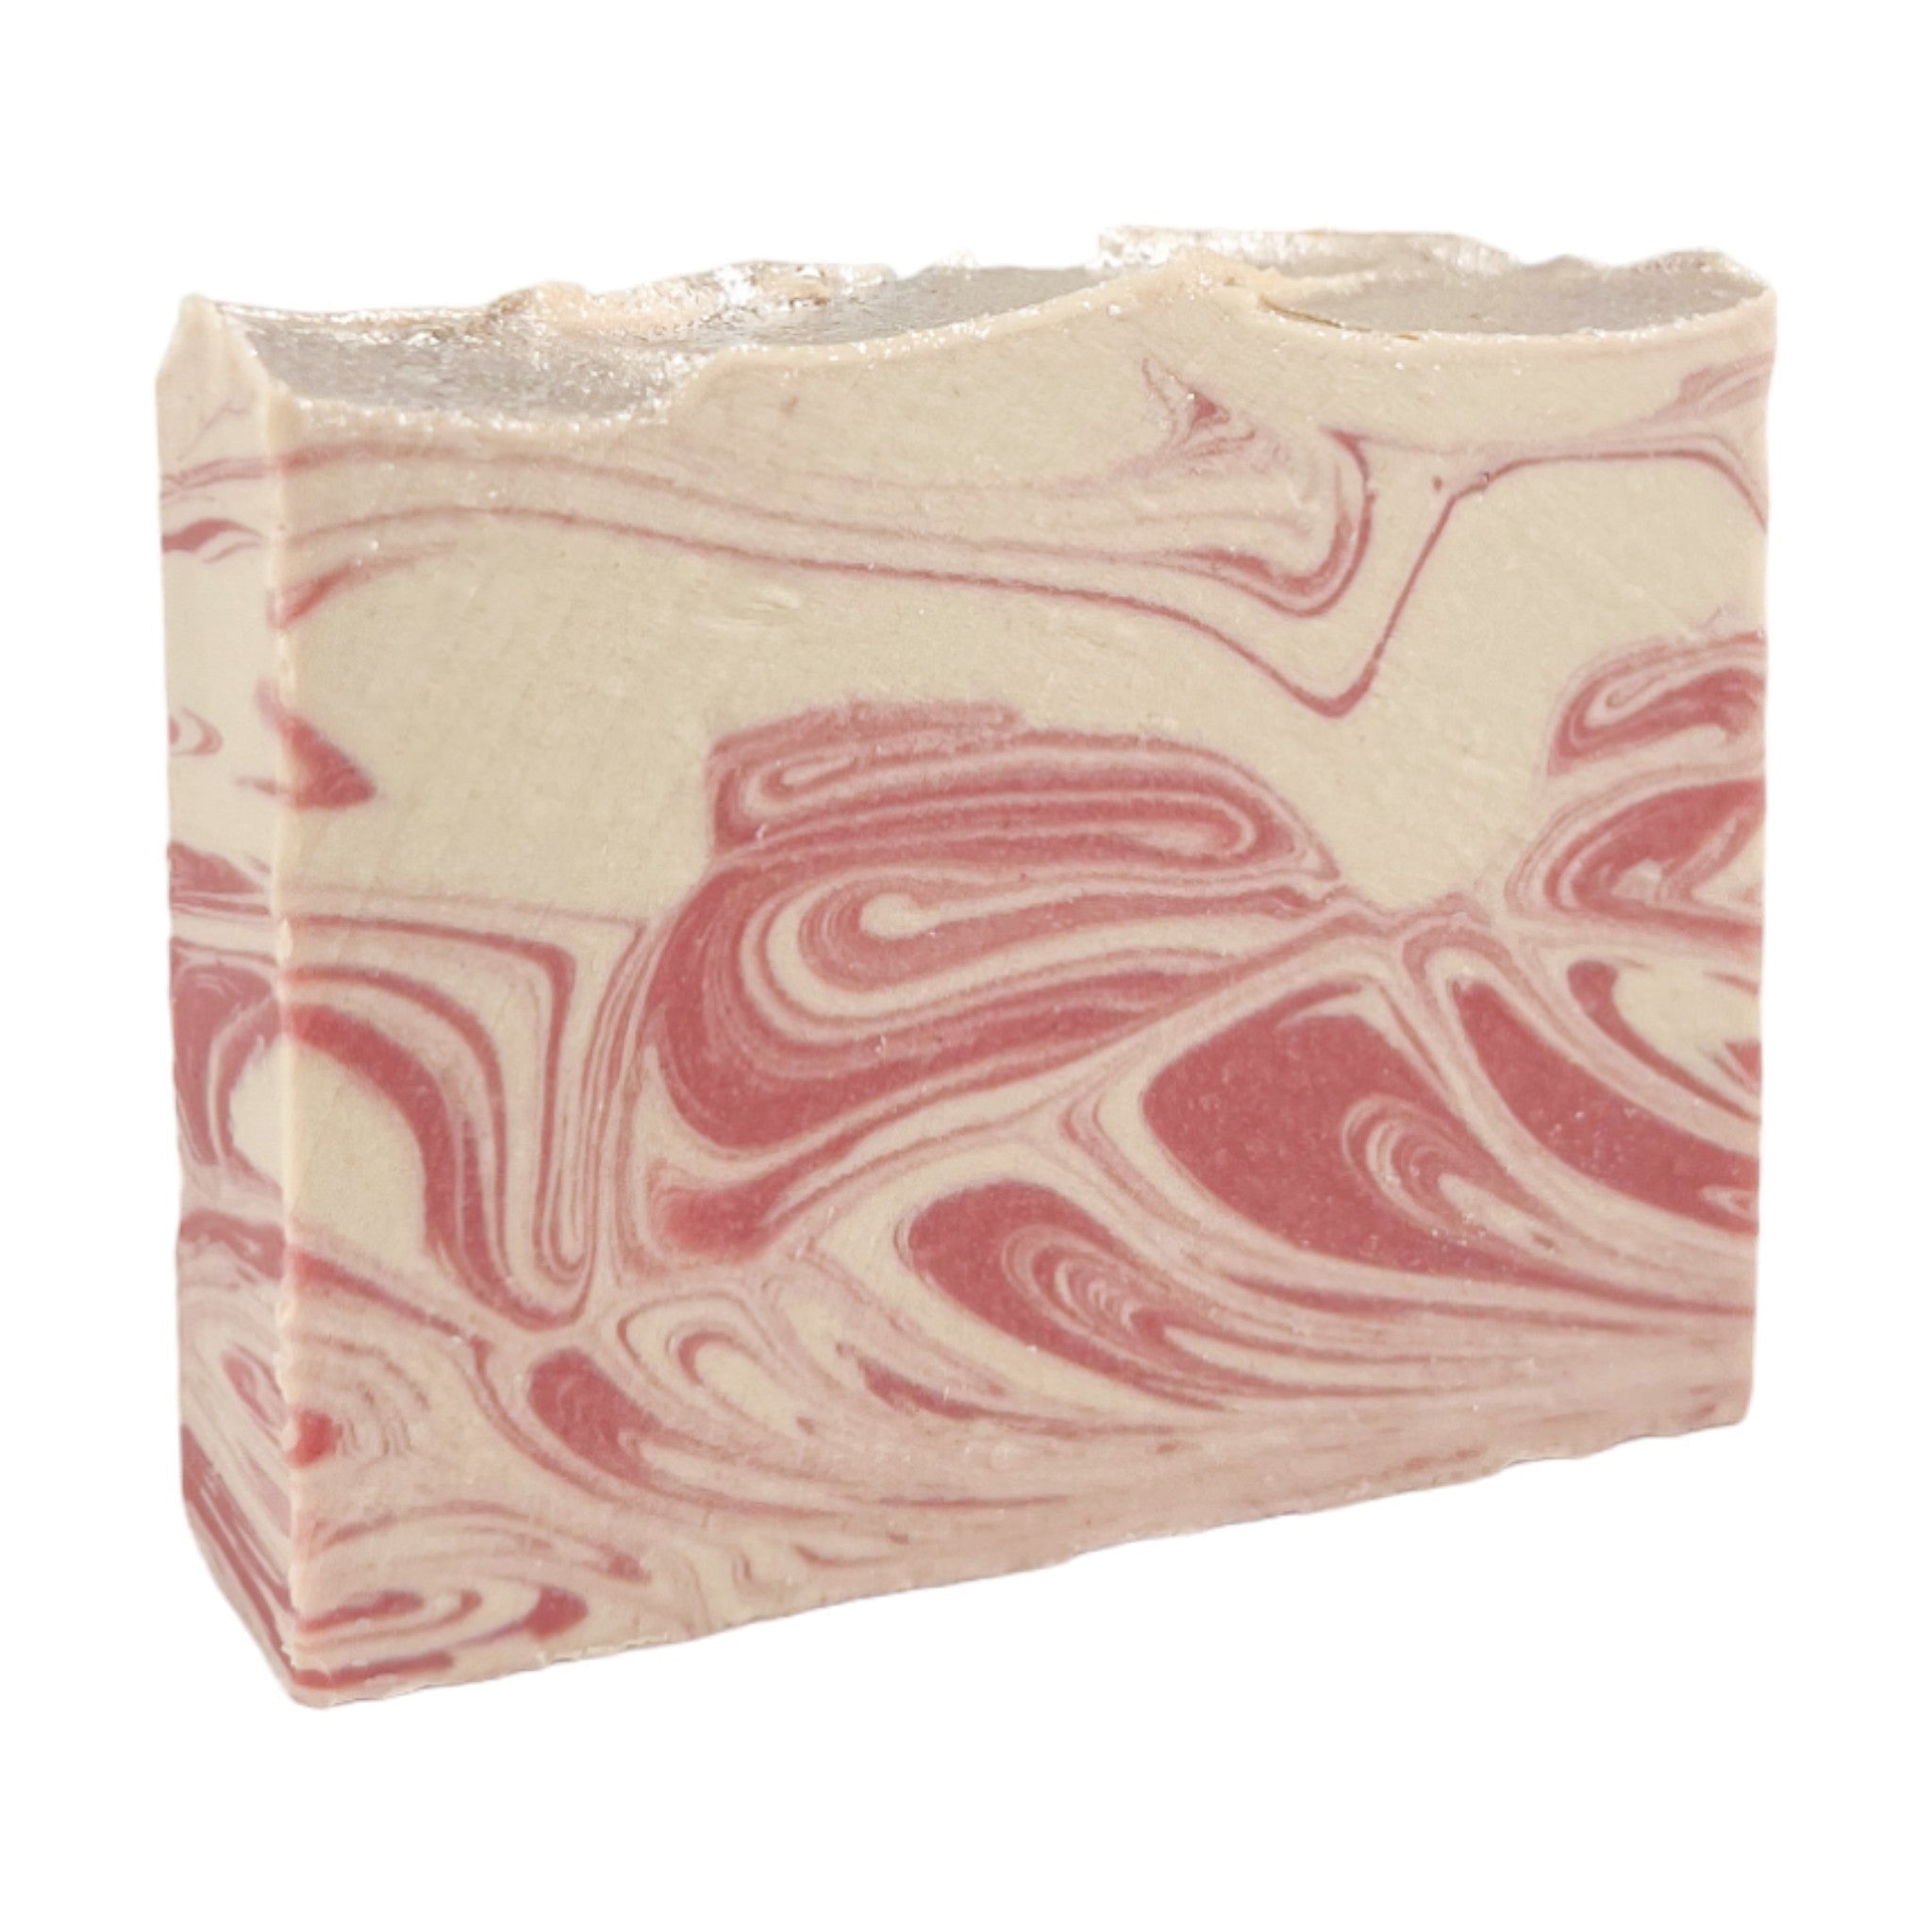 Bite Me -Bar Soap - Old Town Soap Co.